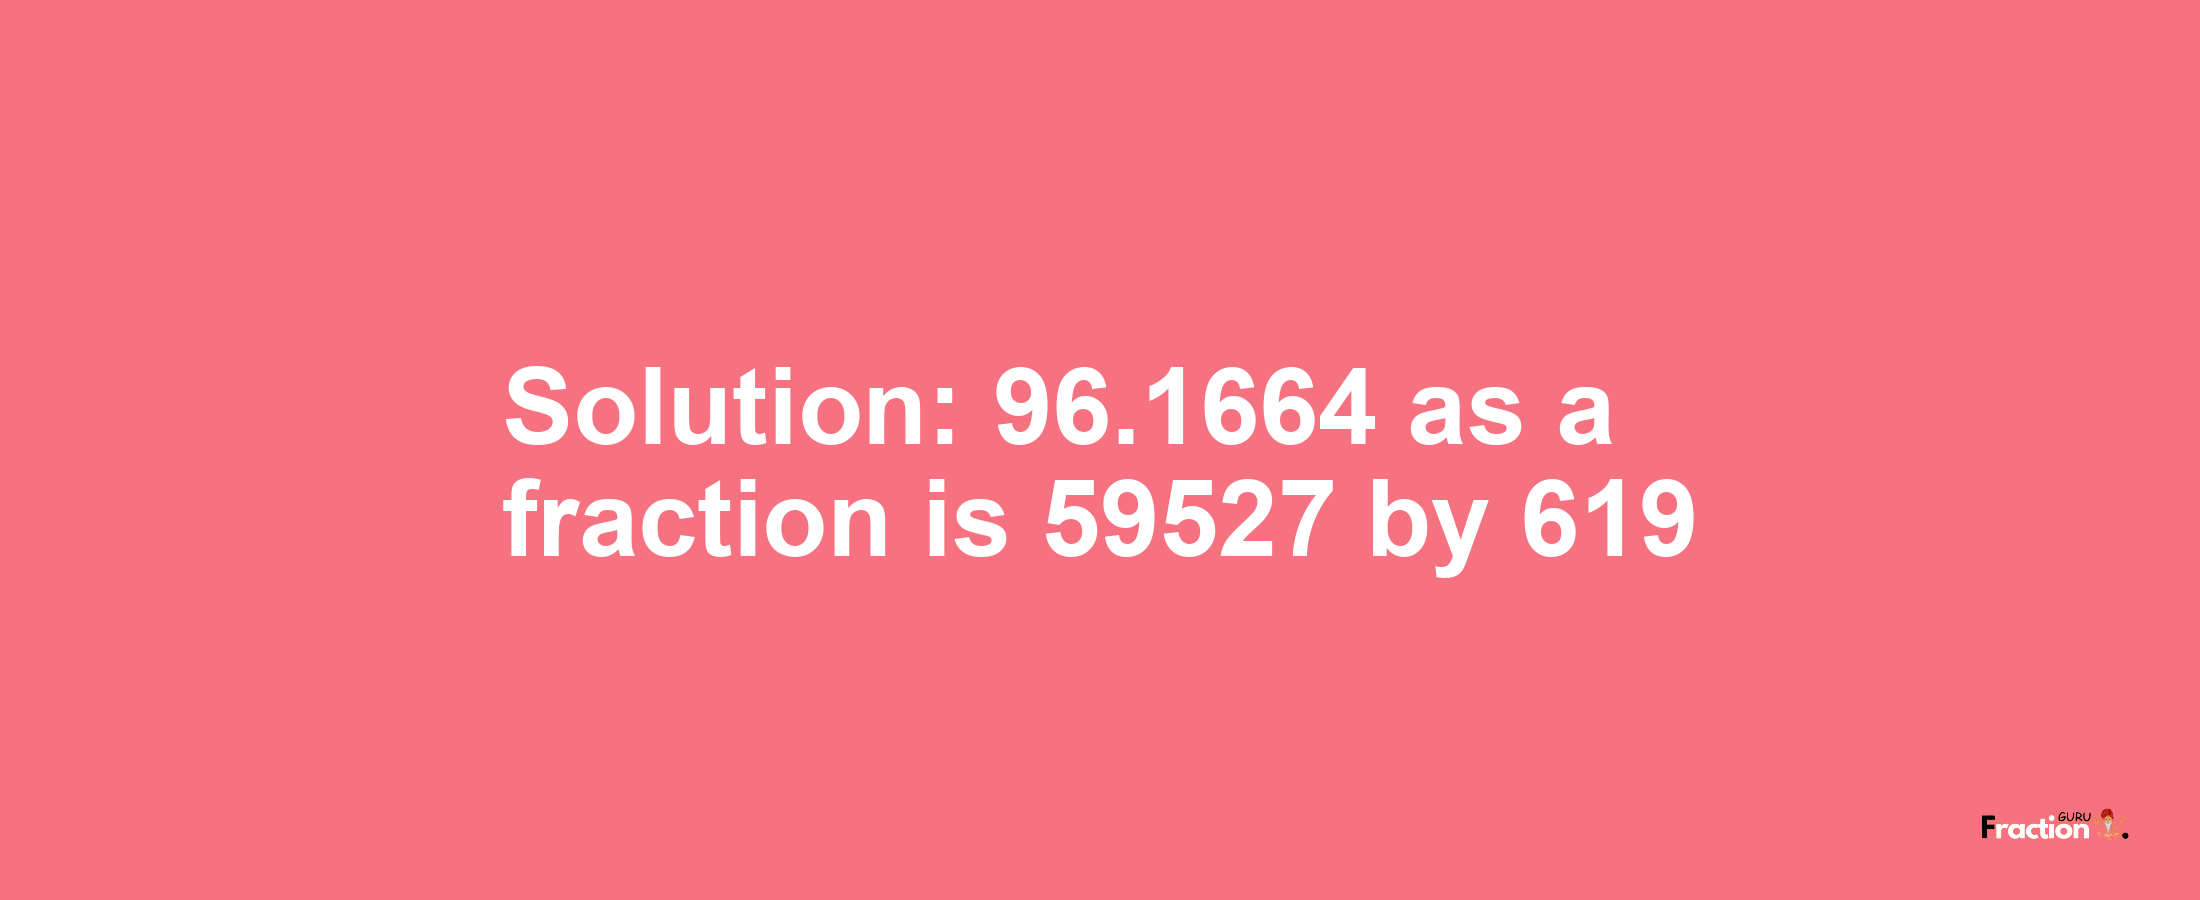 Solution:96.1664 as a fraction is 59527/619